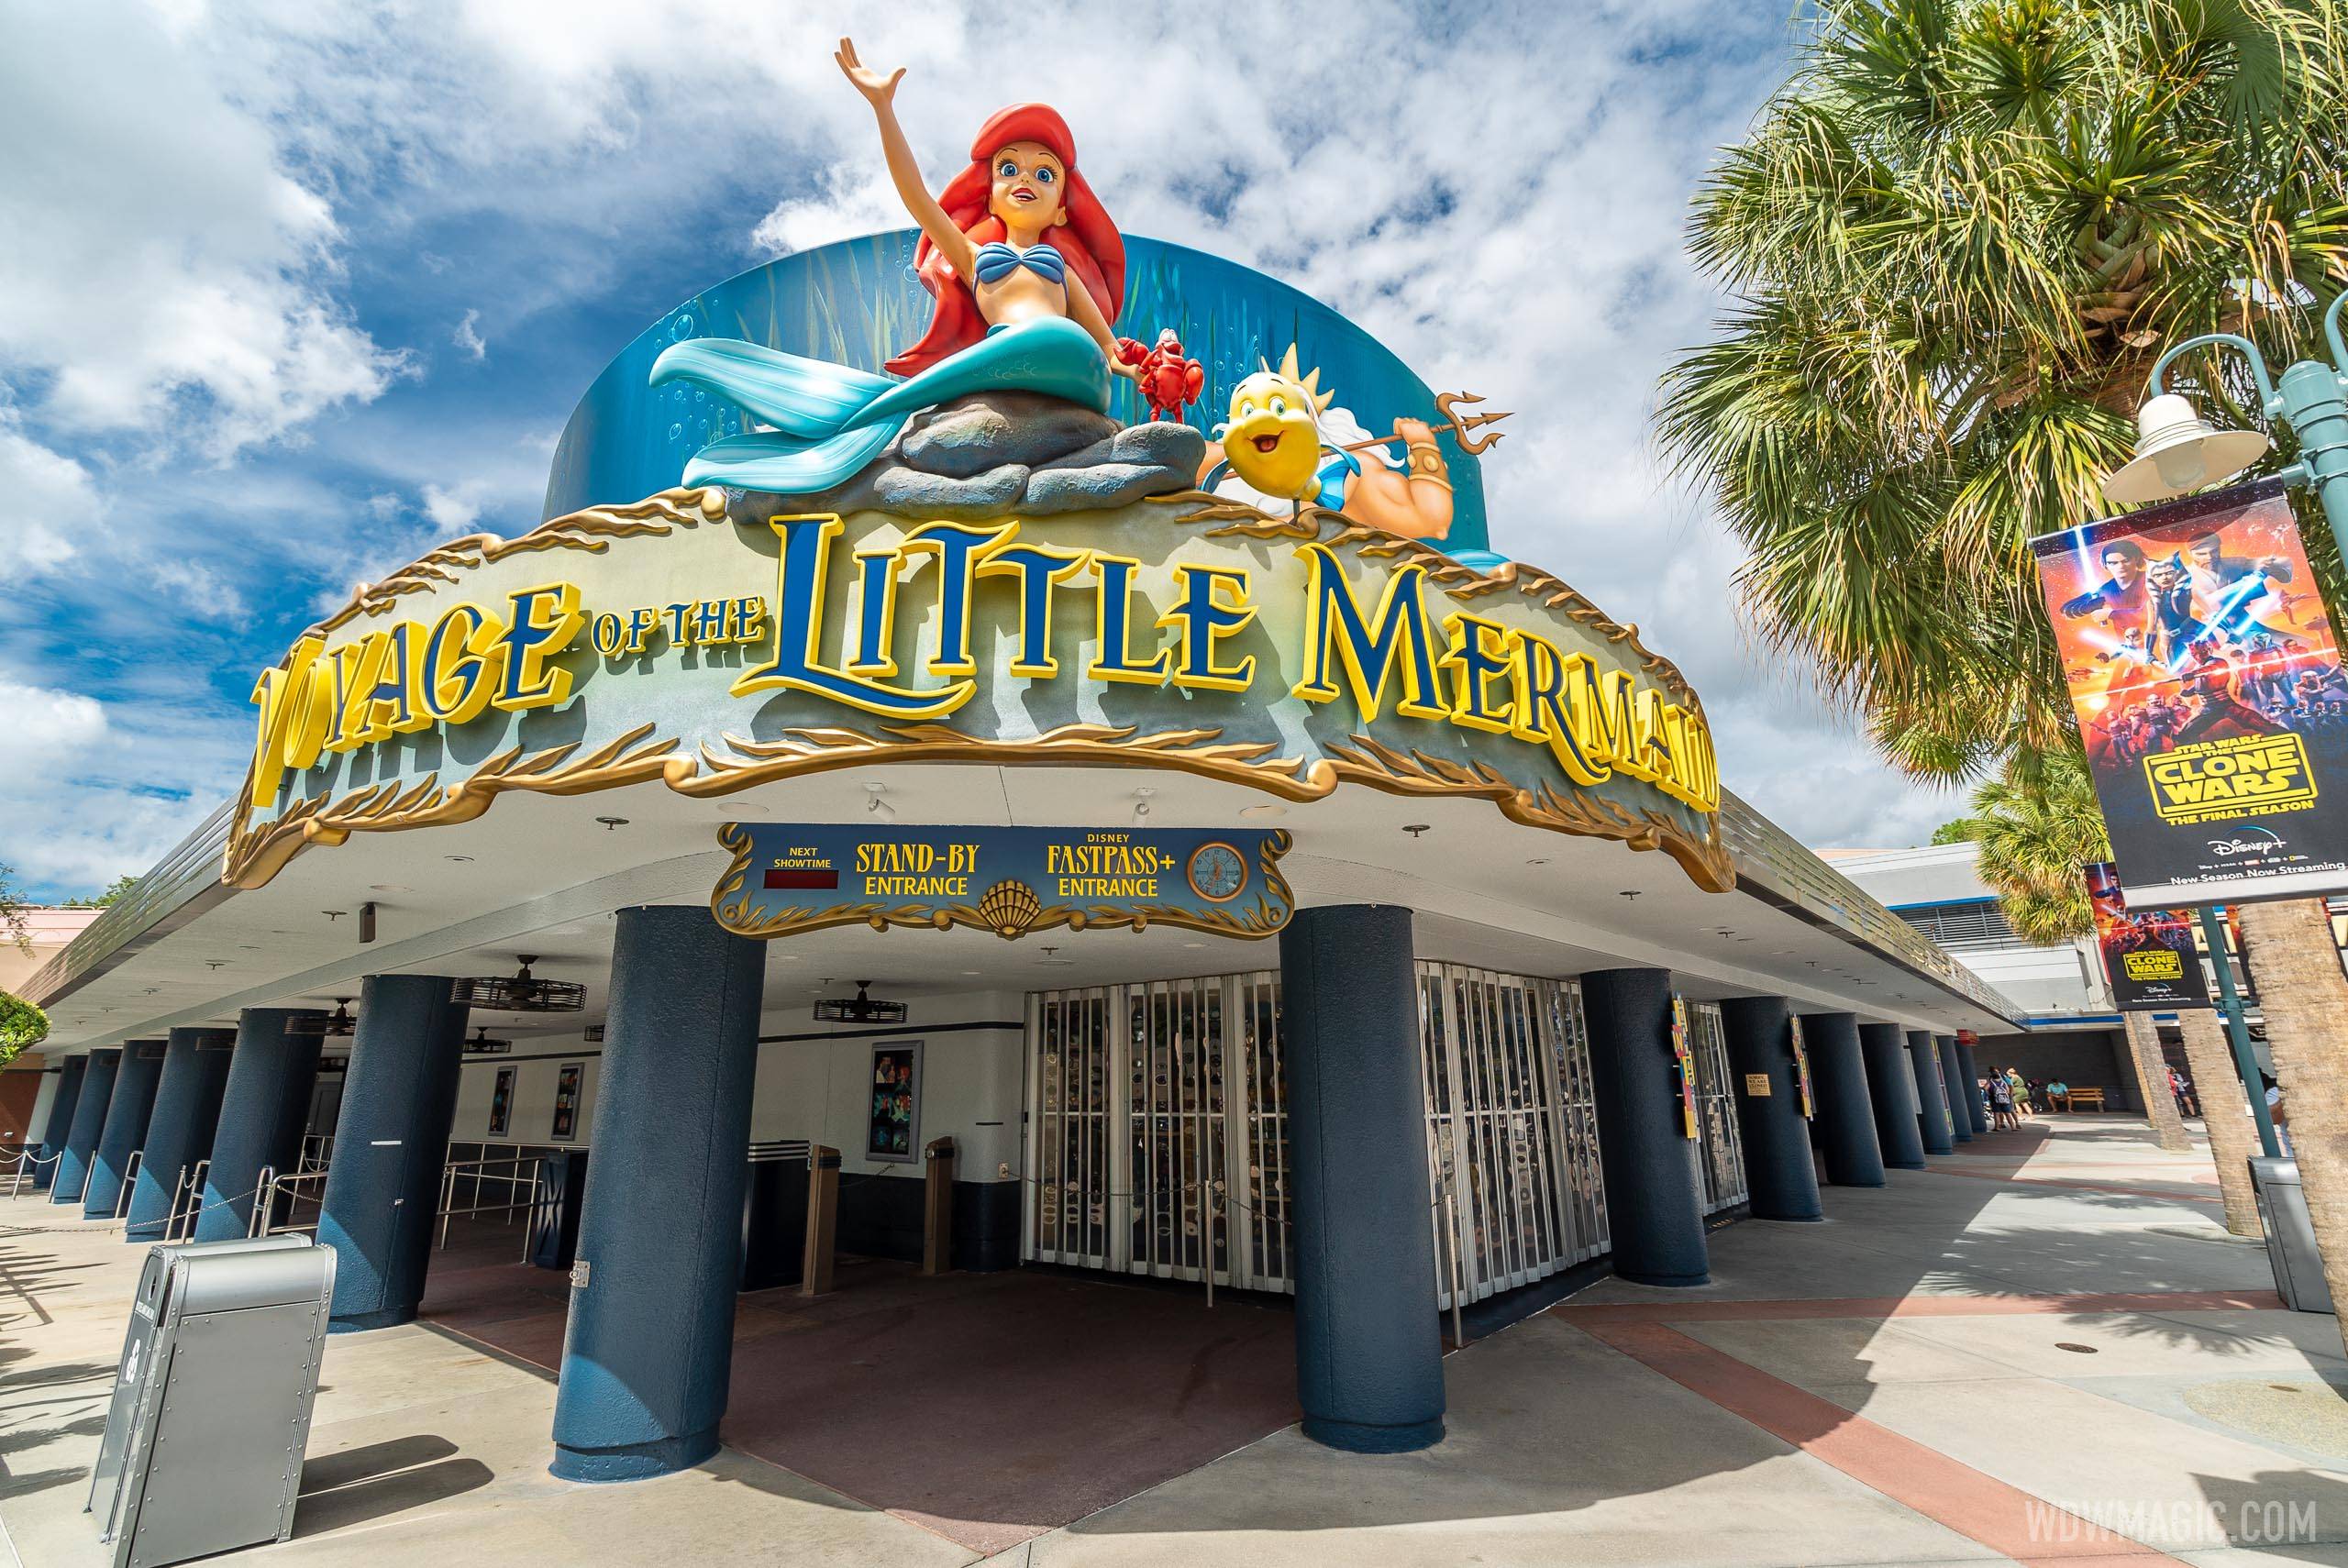 Voyage of the Little Mermaid closing for brief refurbishment this summer